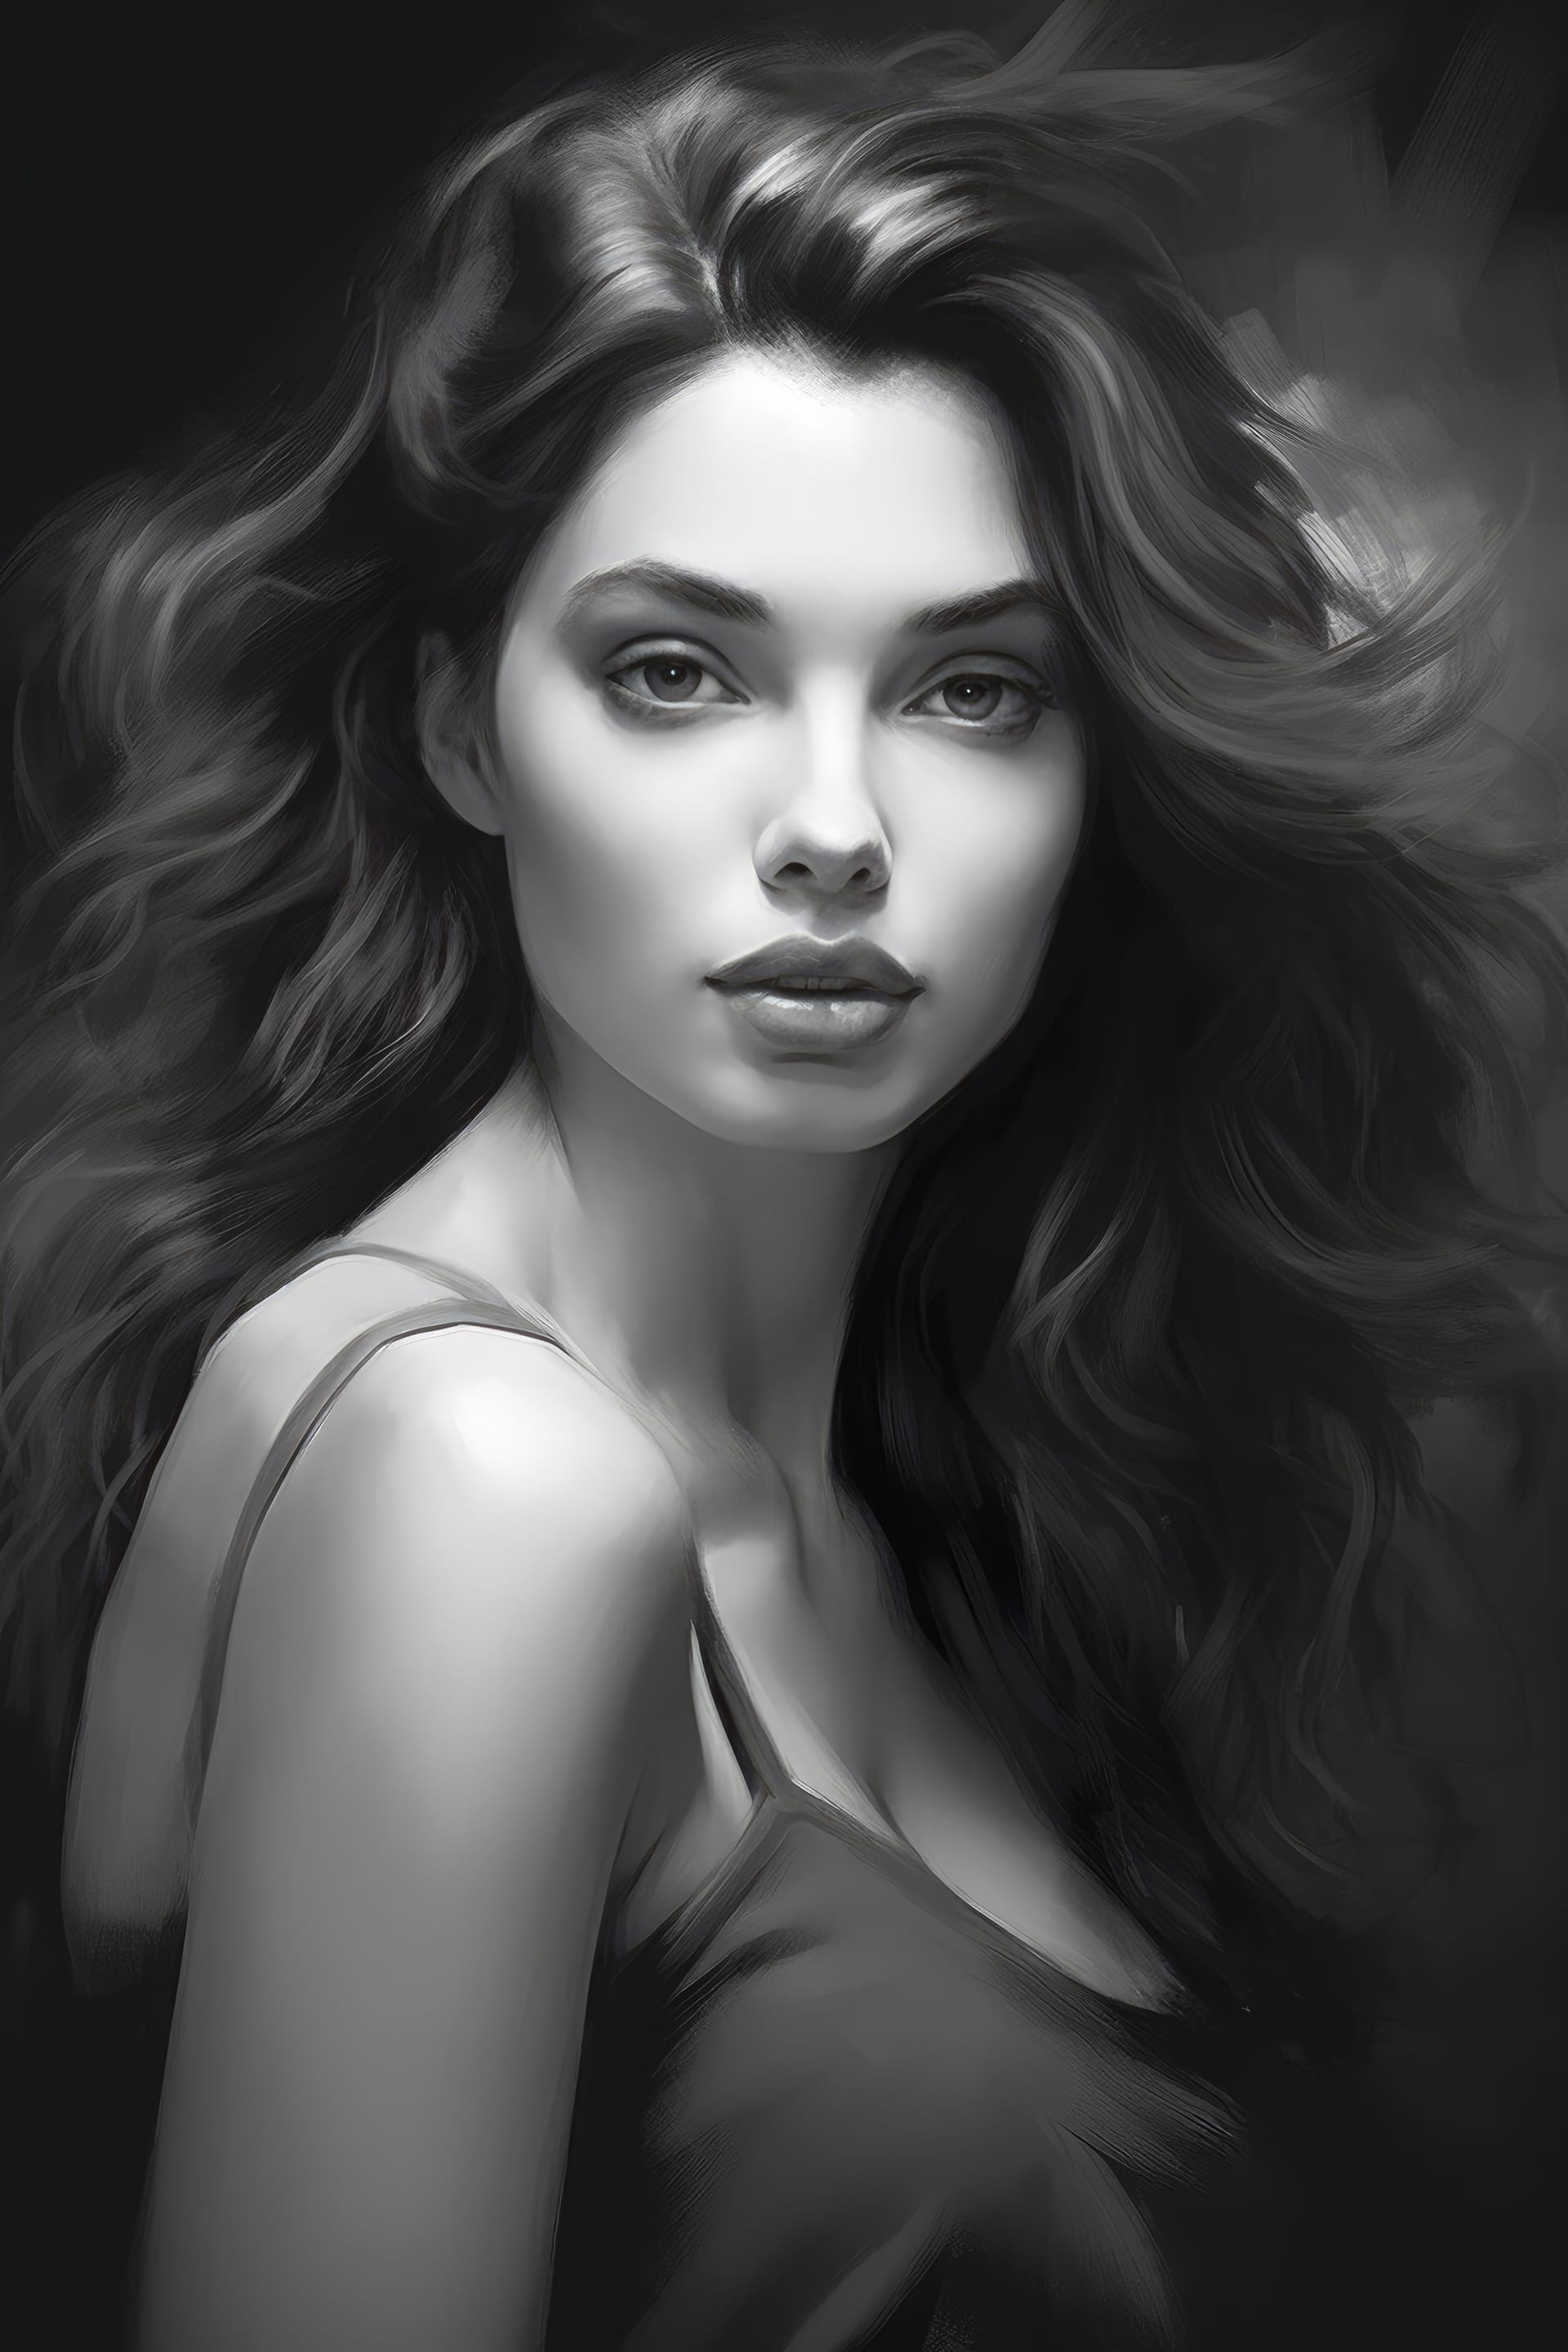 Black and white mesmerizing portrait woman with long hair